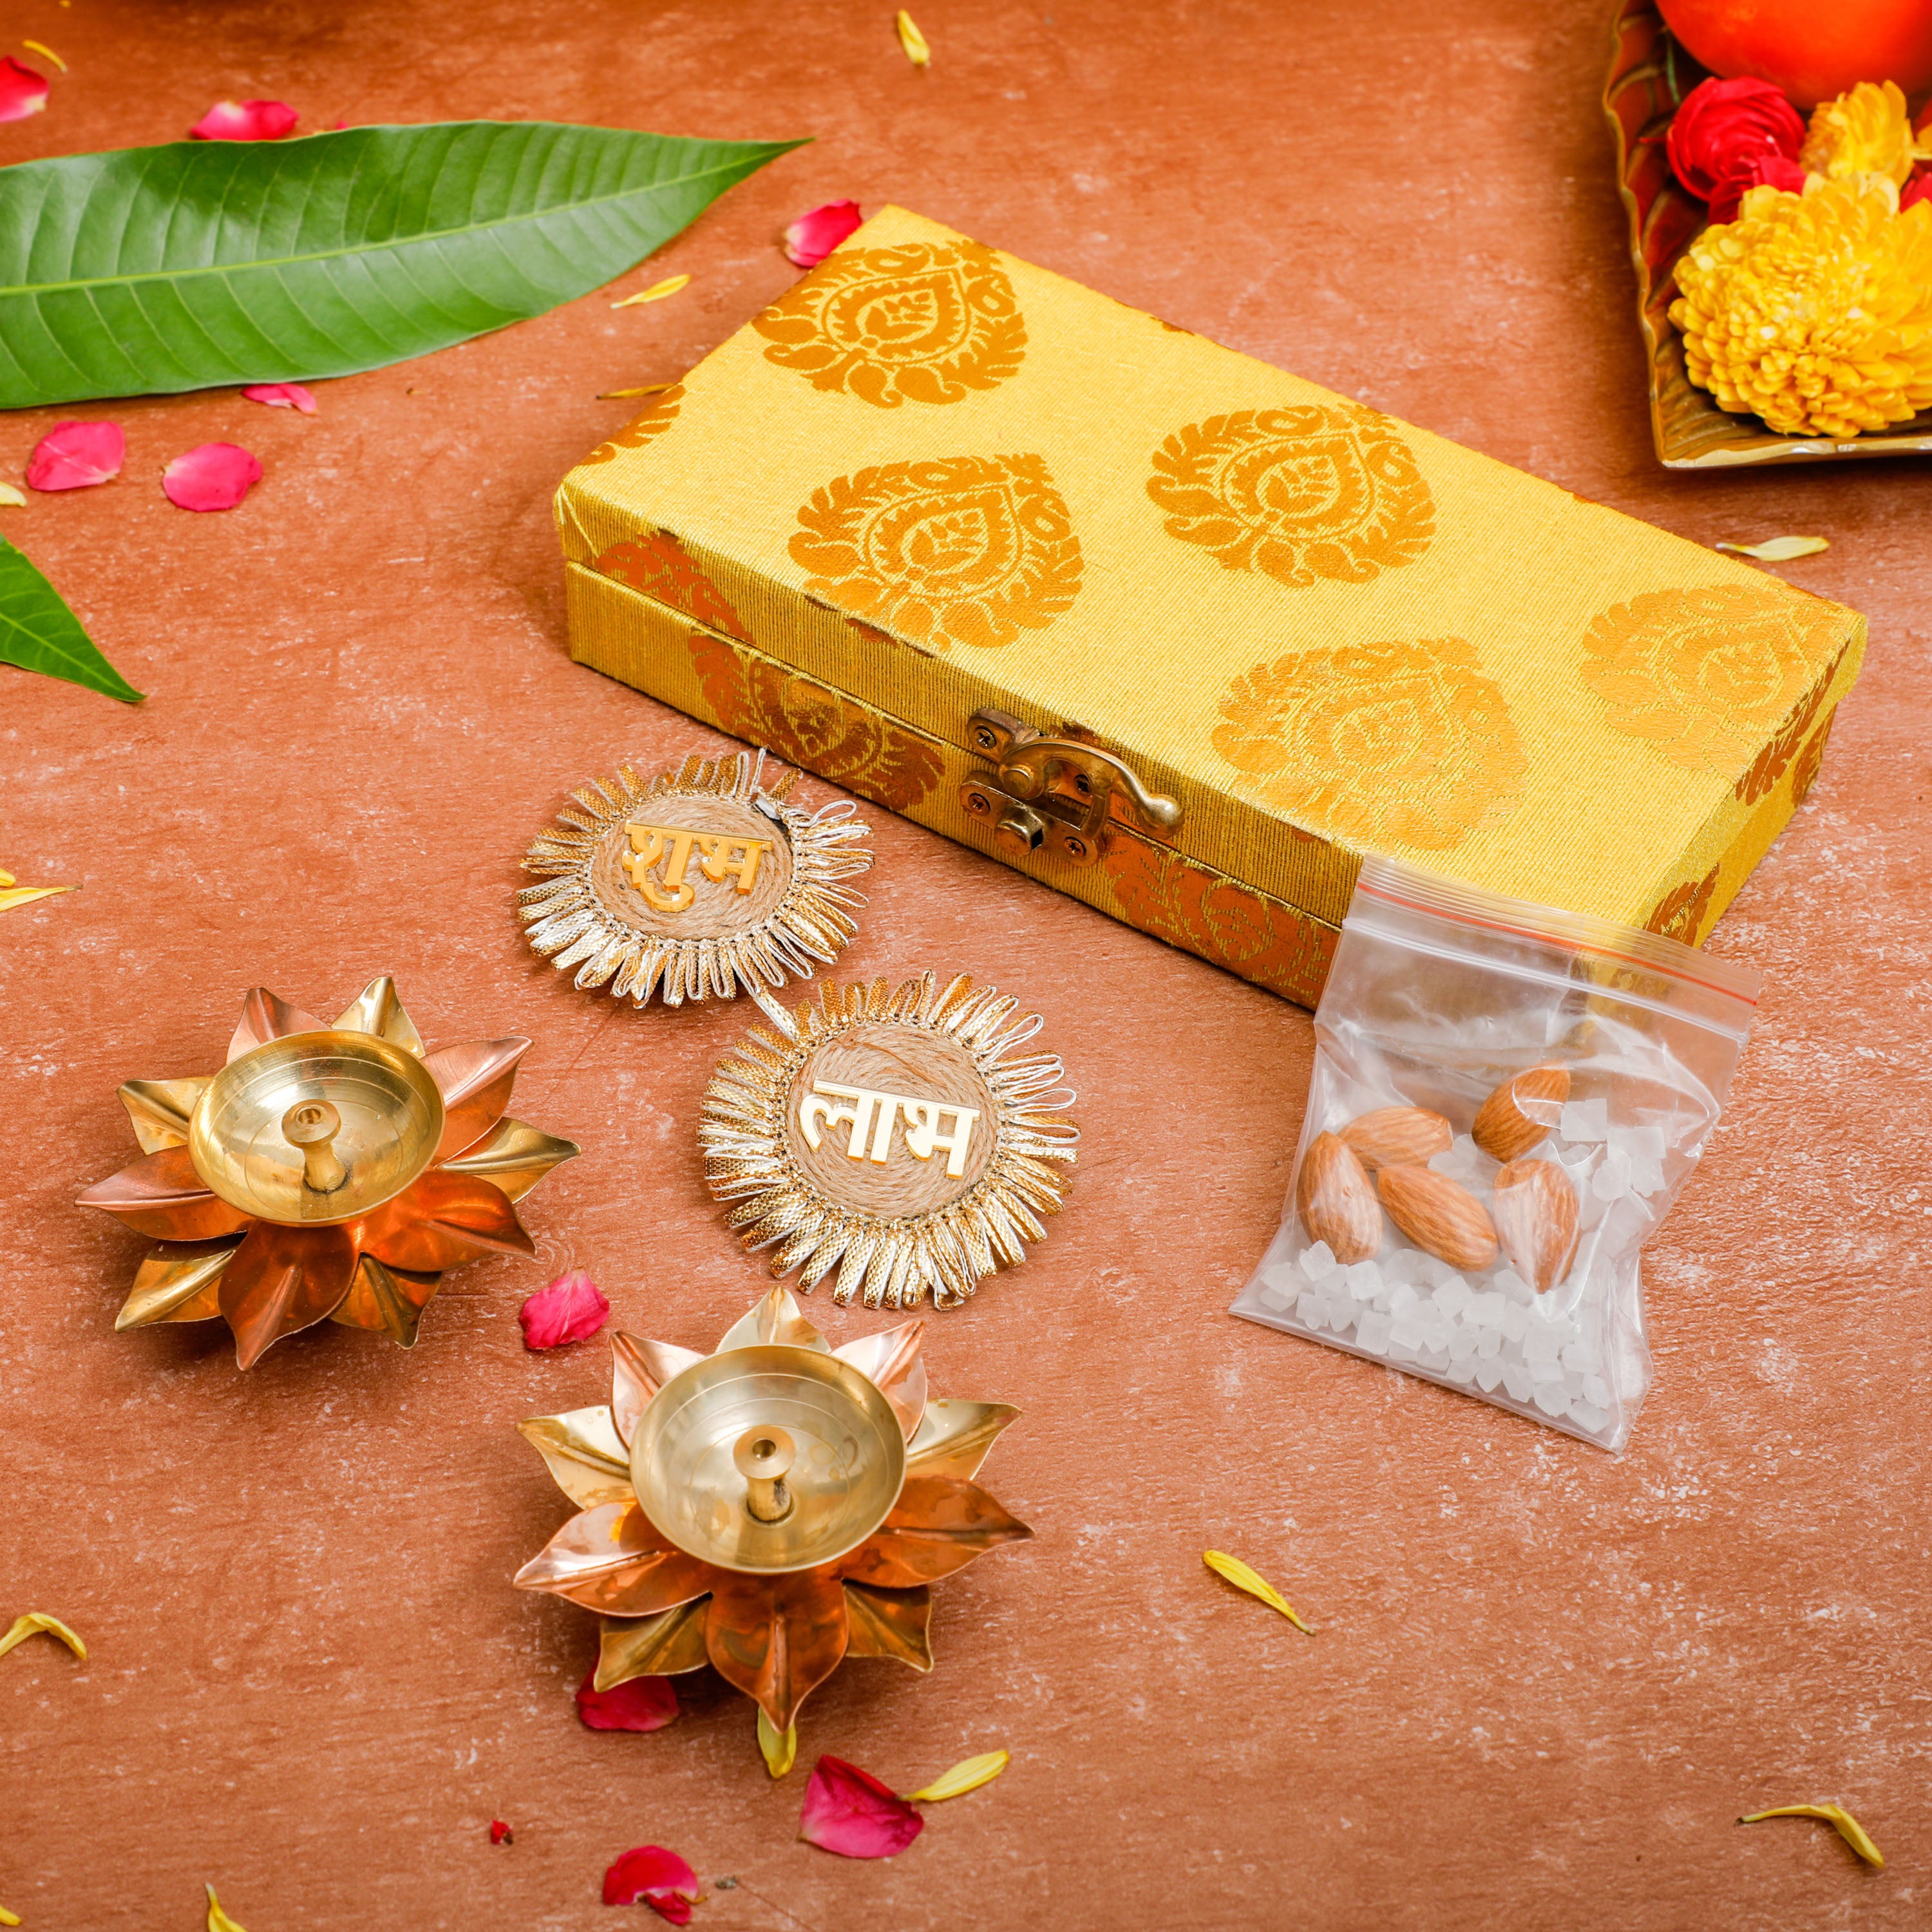 Corporate Diwali Gifts Ideas, corporate diwali gifts supplier in Gurgaon,  Delhi NCR